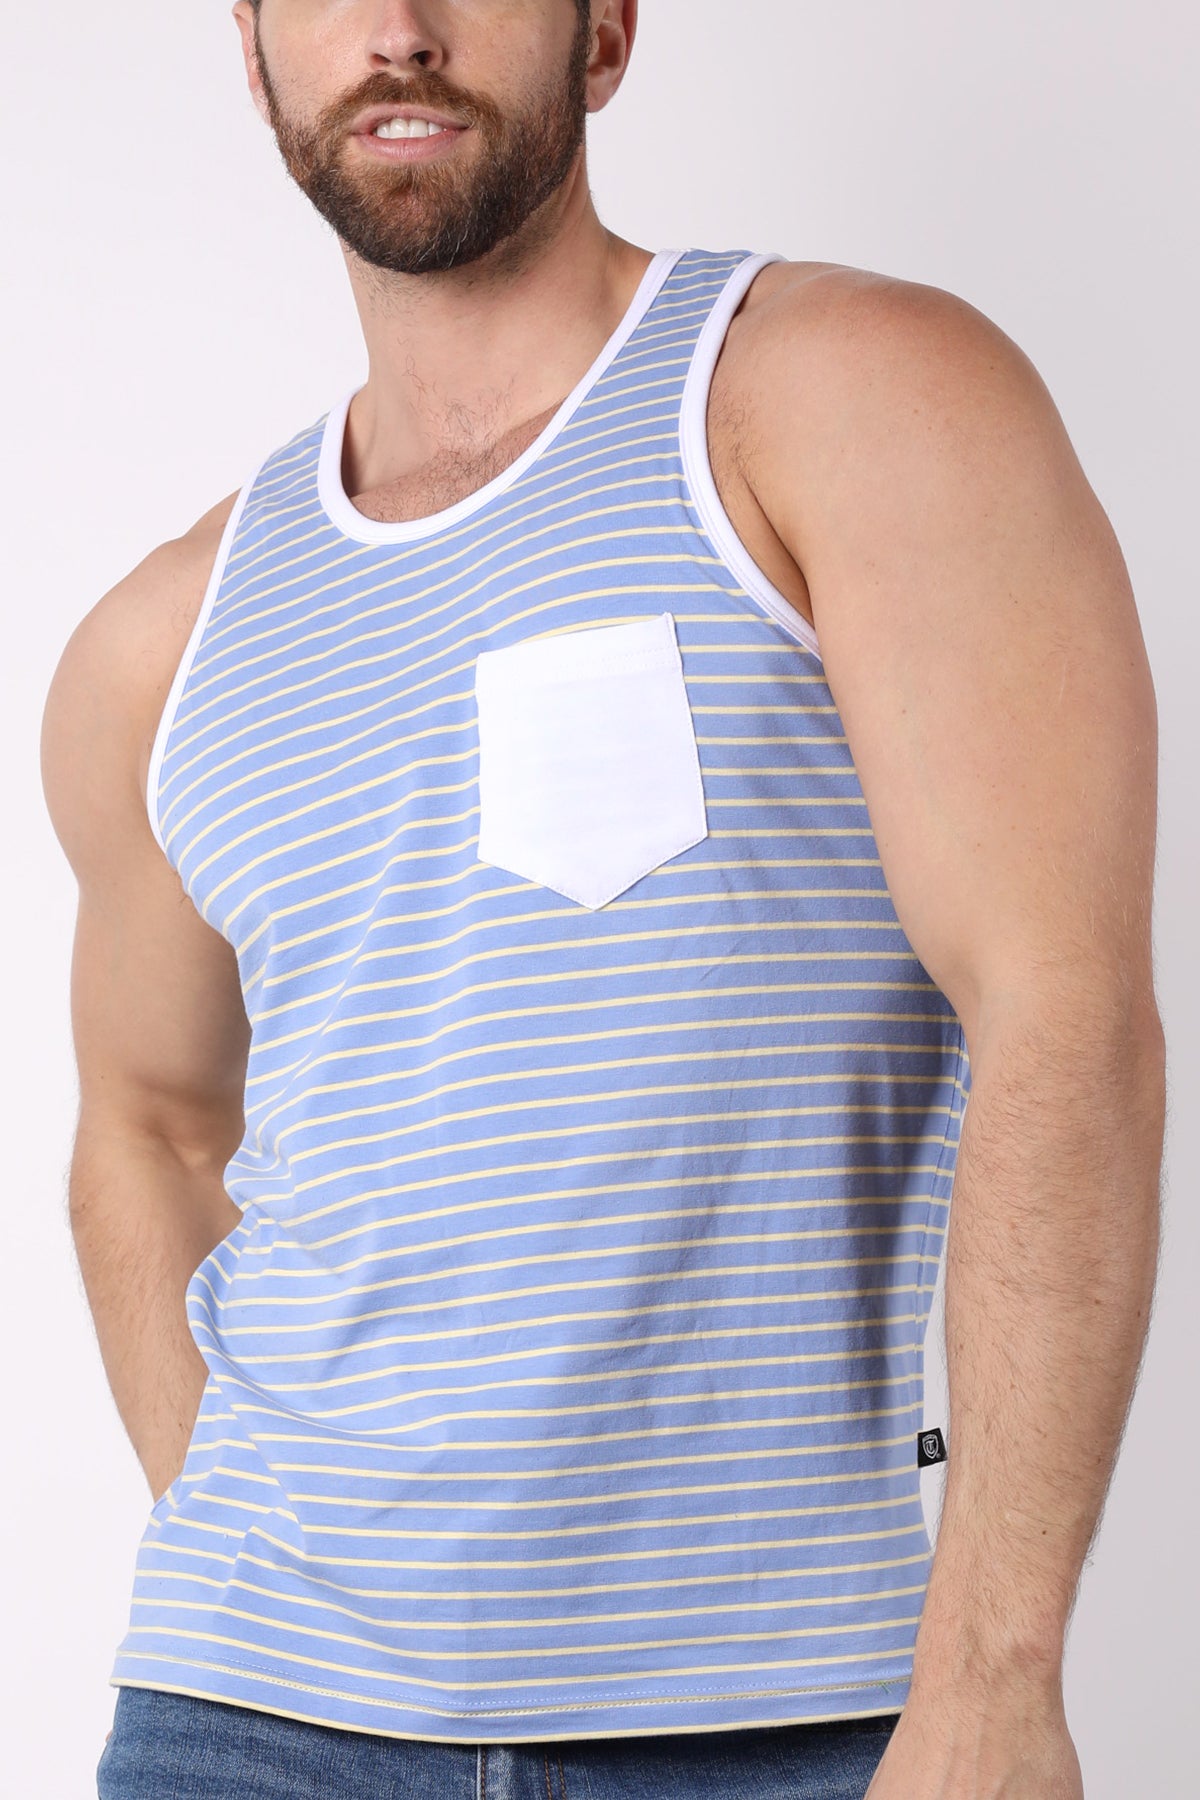 Coral Sands Striped Tank Top **ALL SALES FINAL** –, 42% OFF